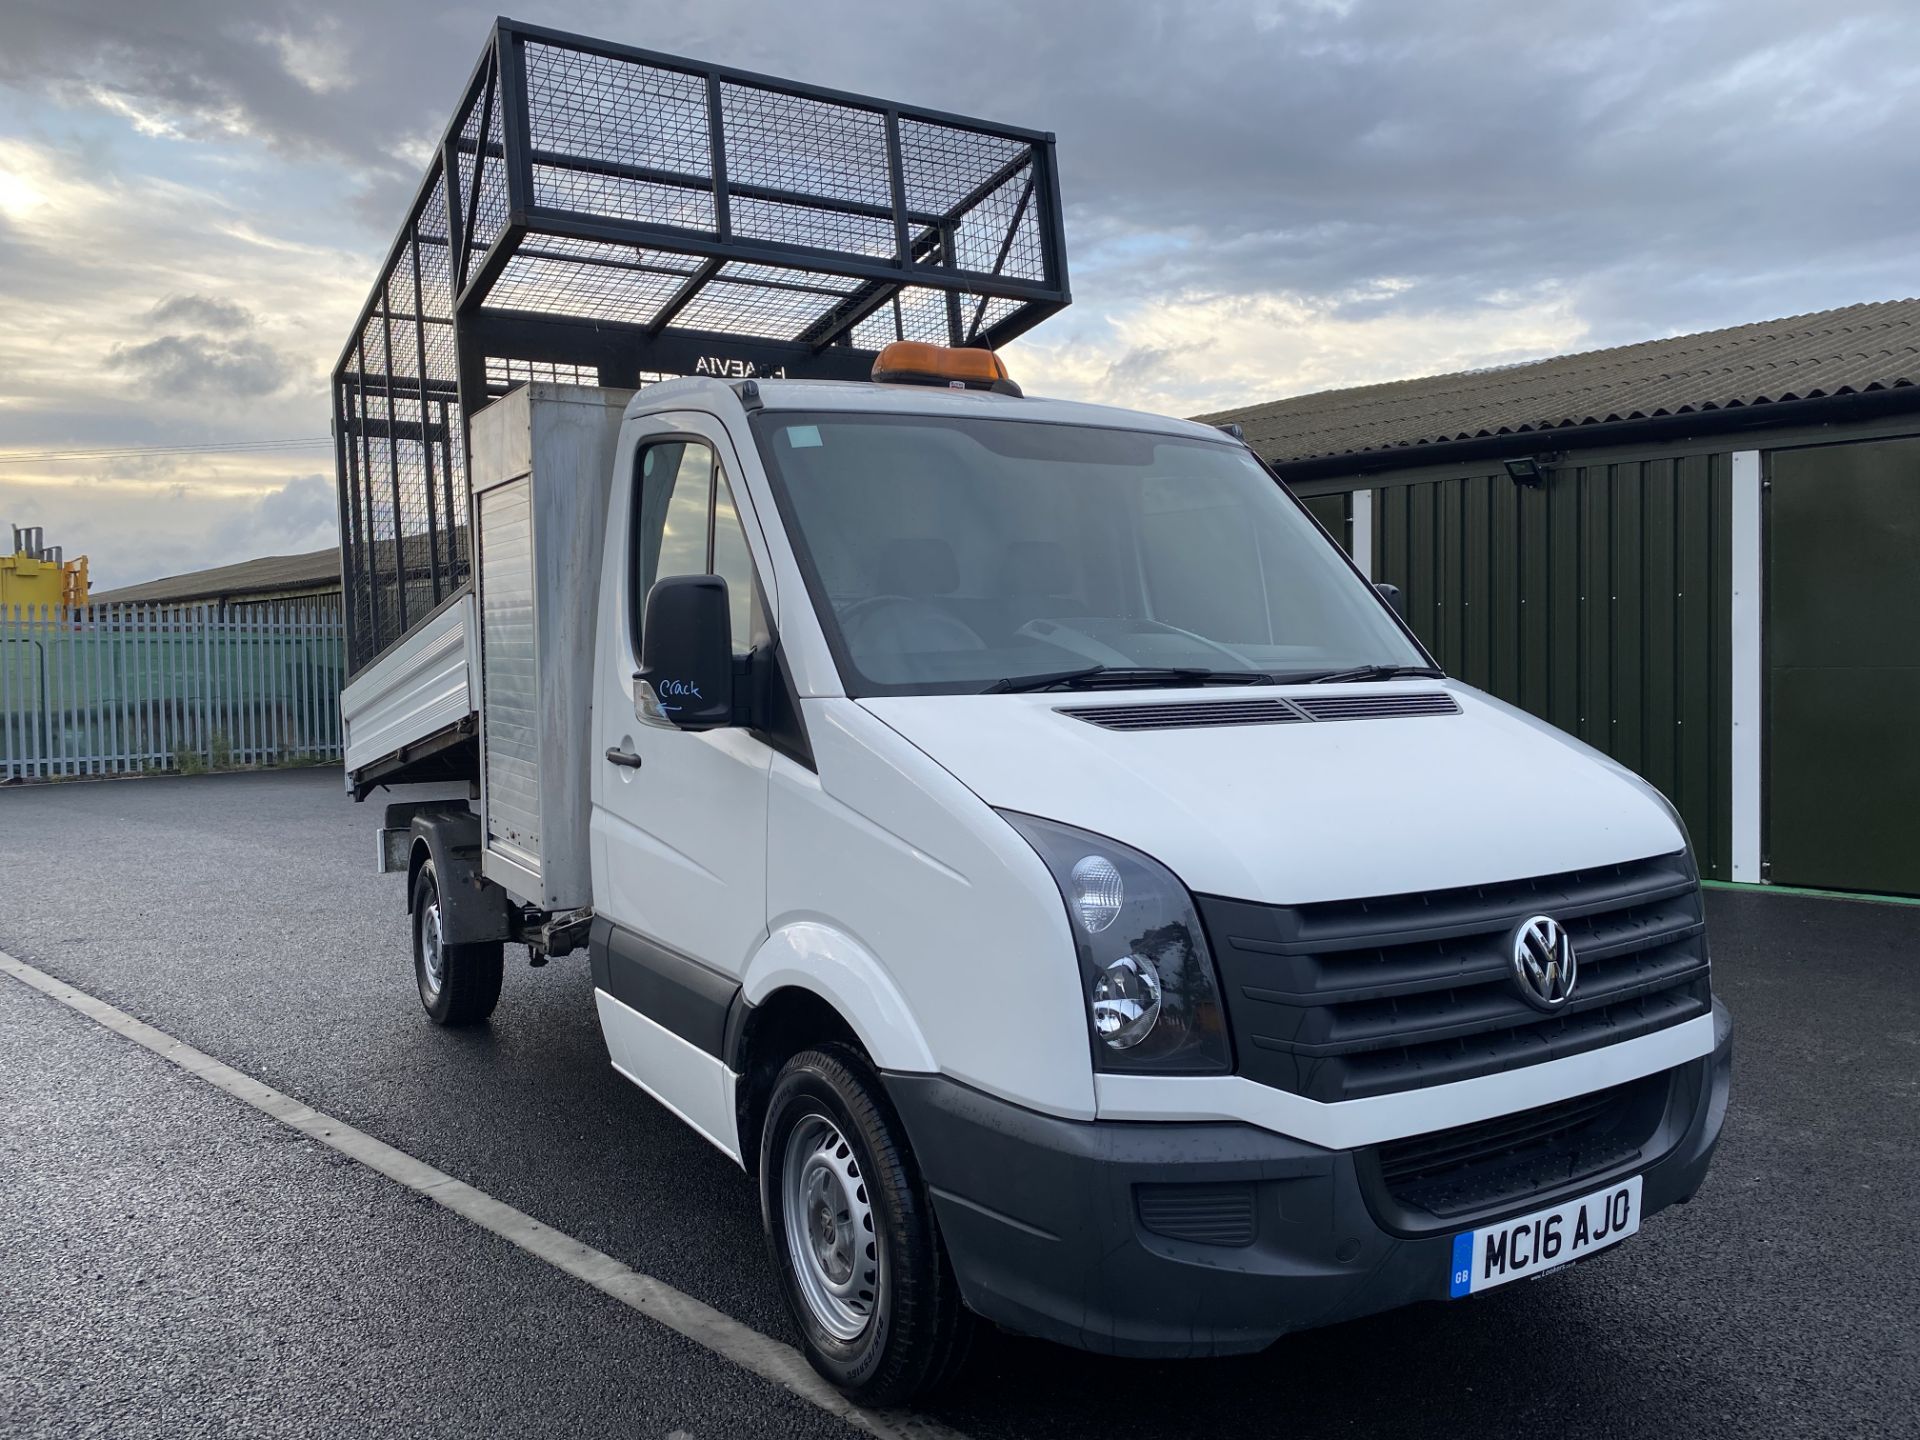 (On Sale) VOLKSWAGEN CRAFTER CR35 2.0TDI CAGED TIPPER TRUCK - 16 REG - ONLY 35K MILES - 1 OWNER - Image 2 of 8